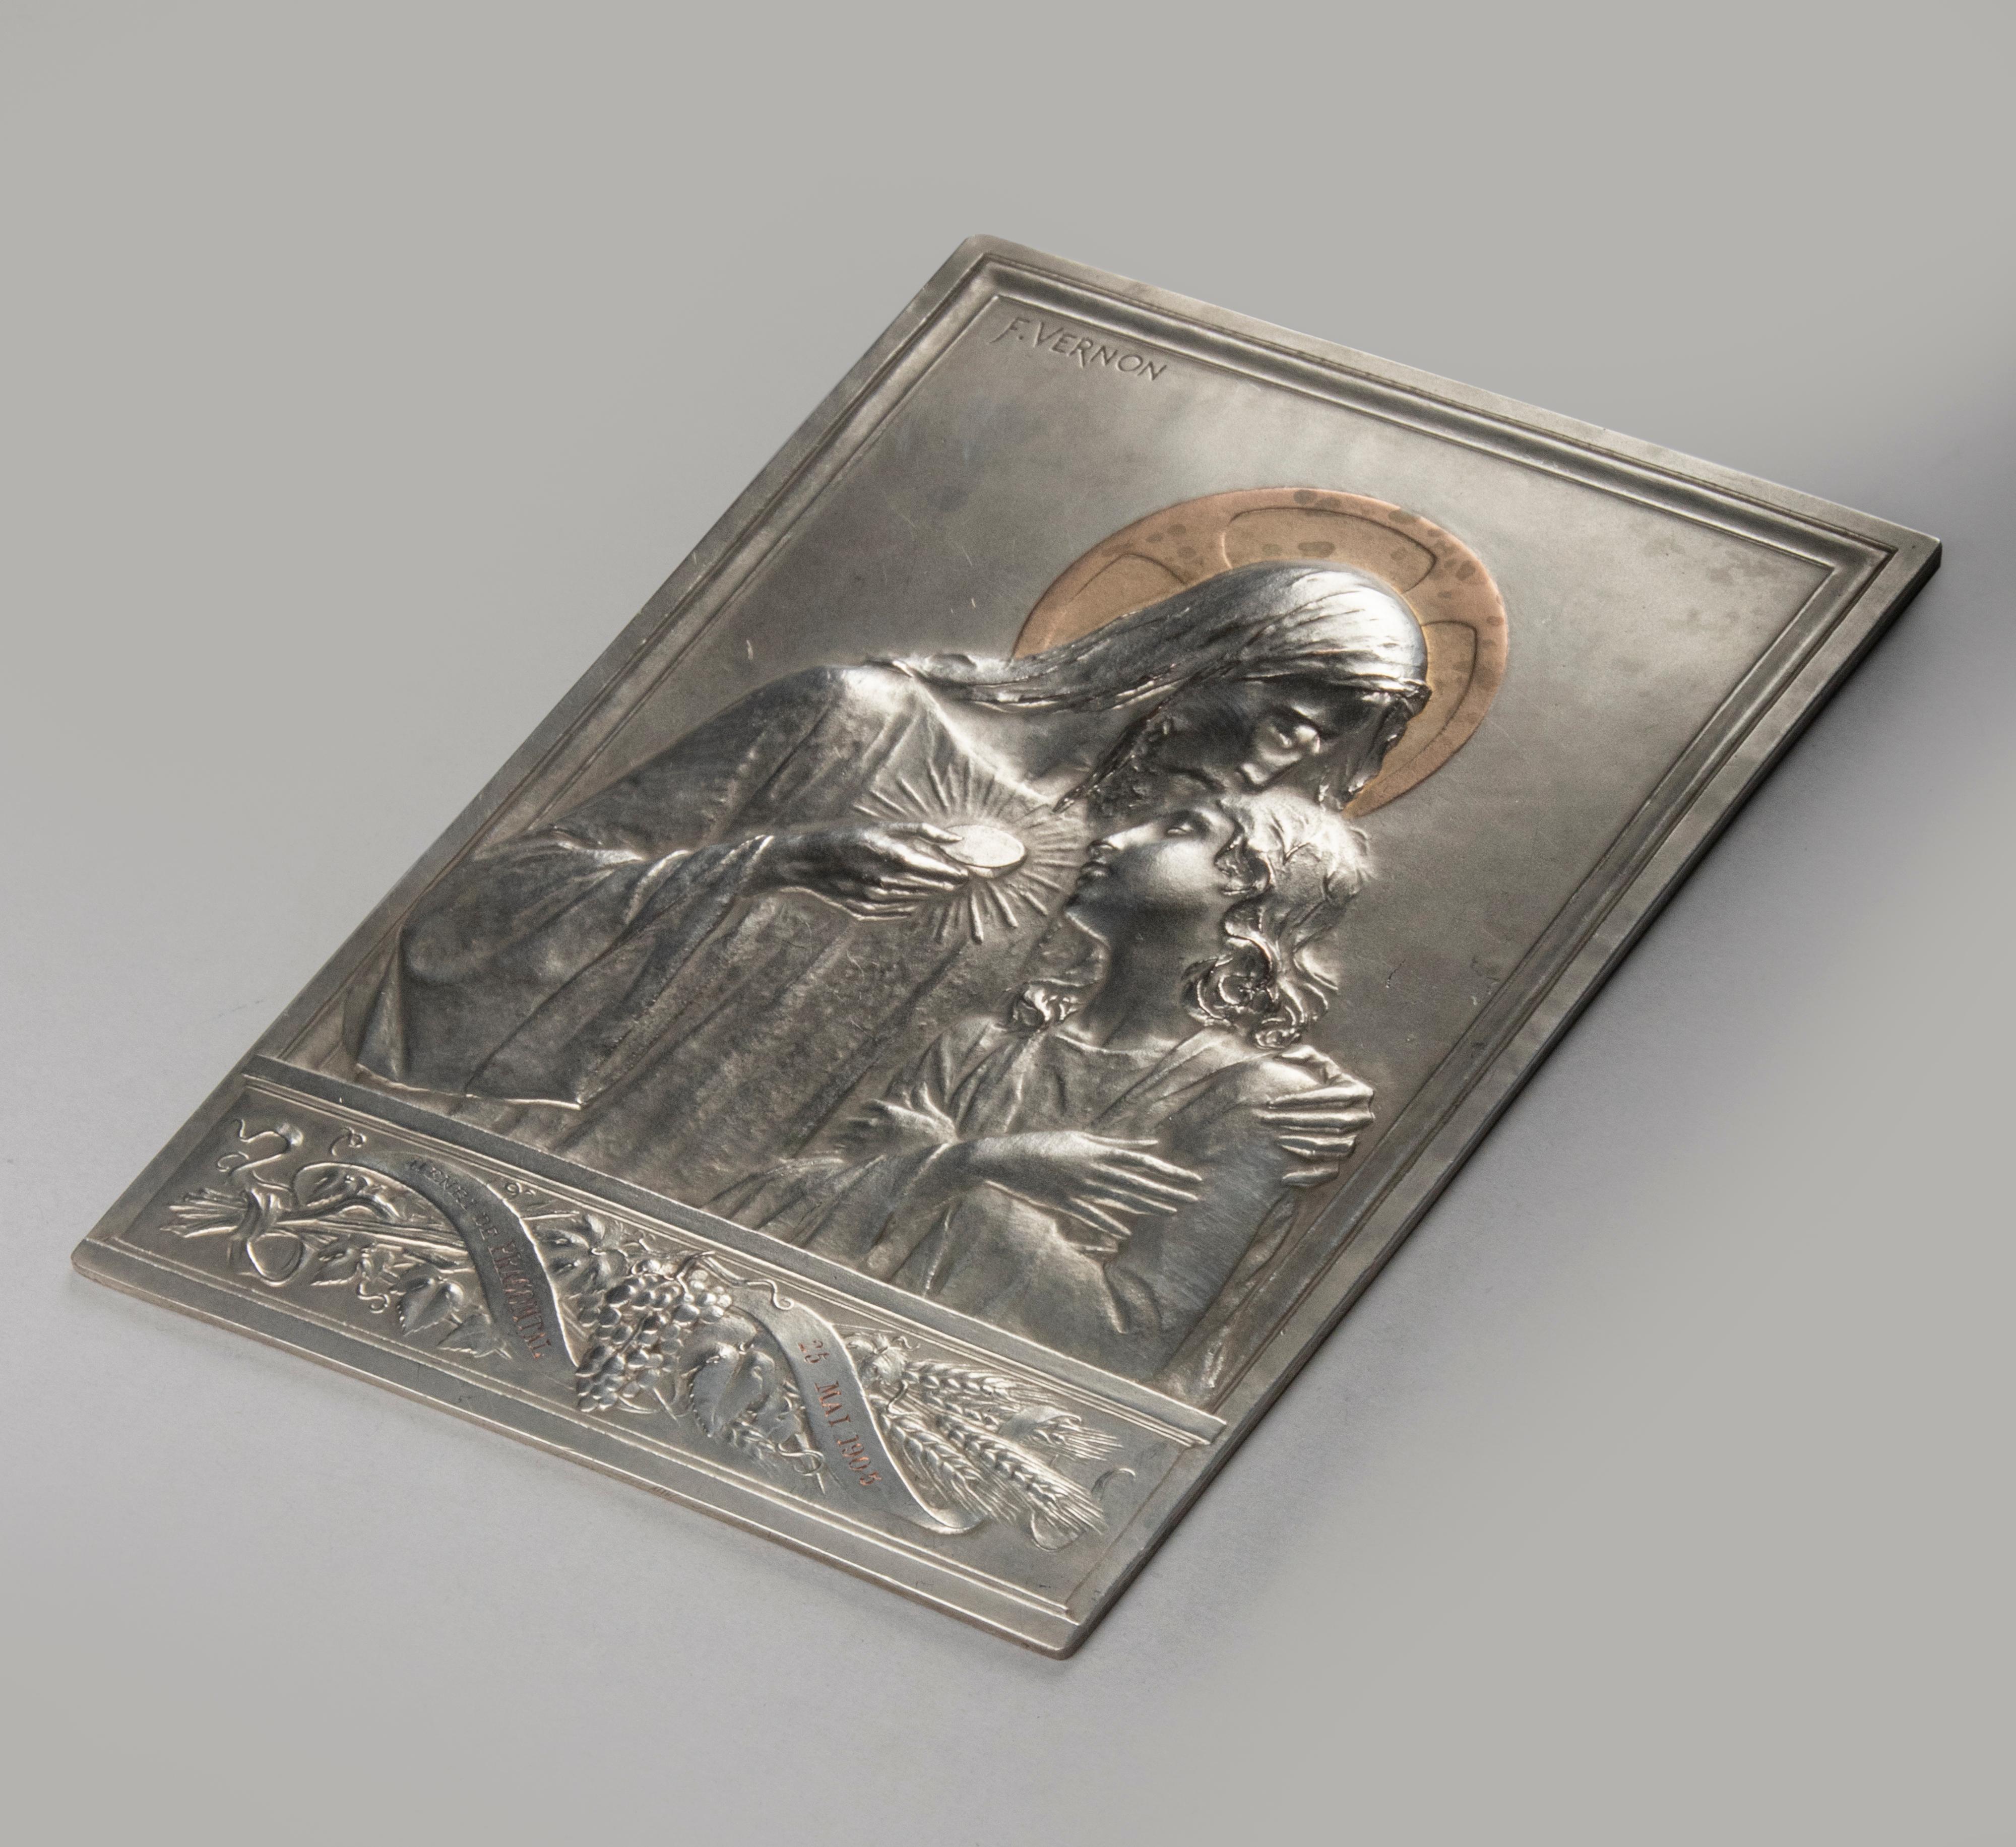 Beautiful antique plaque with an image of Jesus Christ with a child. The plaque is beautifully decorated, with fine details and nice engraving. The plaque is signed 'Vernon' and dated 1905.

Frédéric-Charles Victor de Vernon (17 November 1858, in